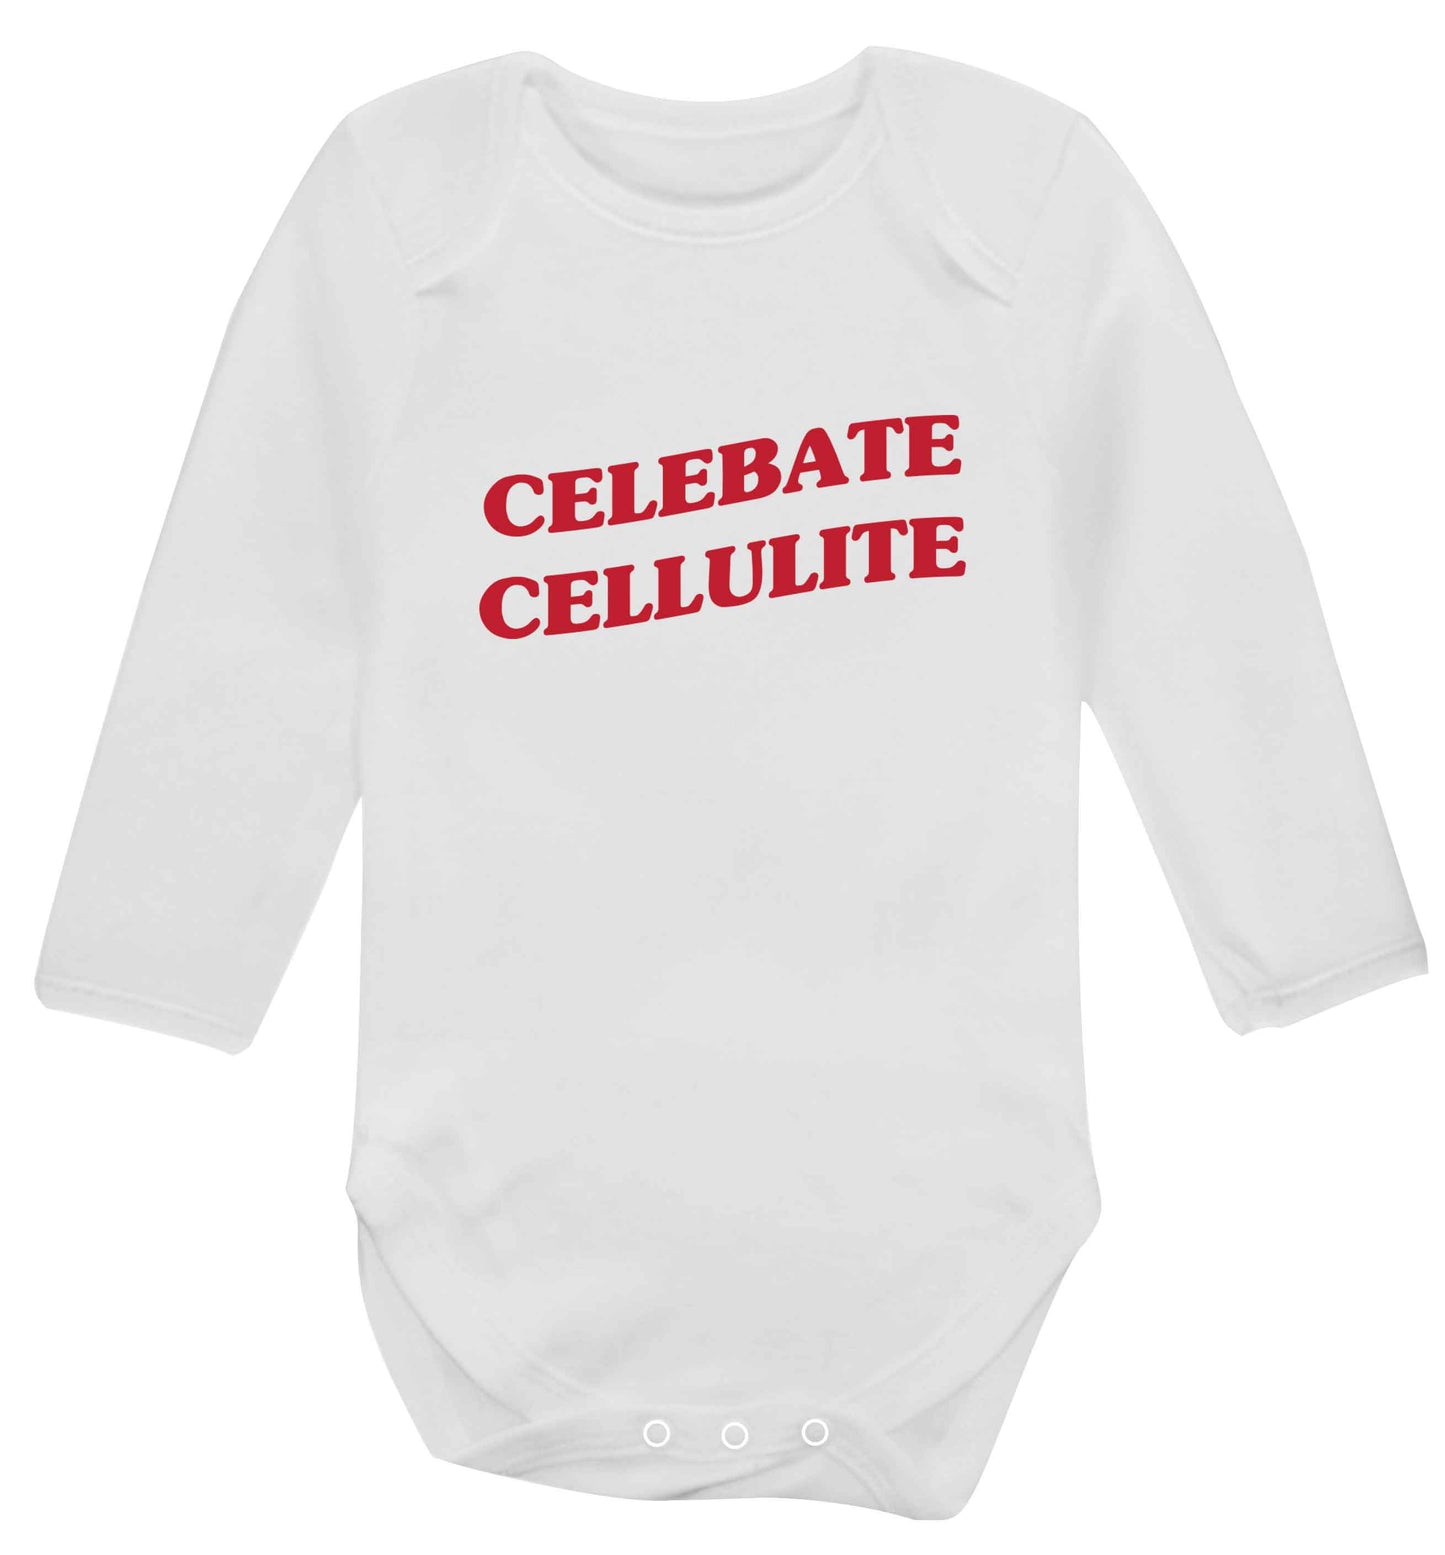 Celebrate cellulite baby vest long sleeved white 6-12 months